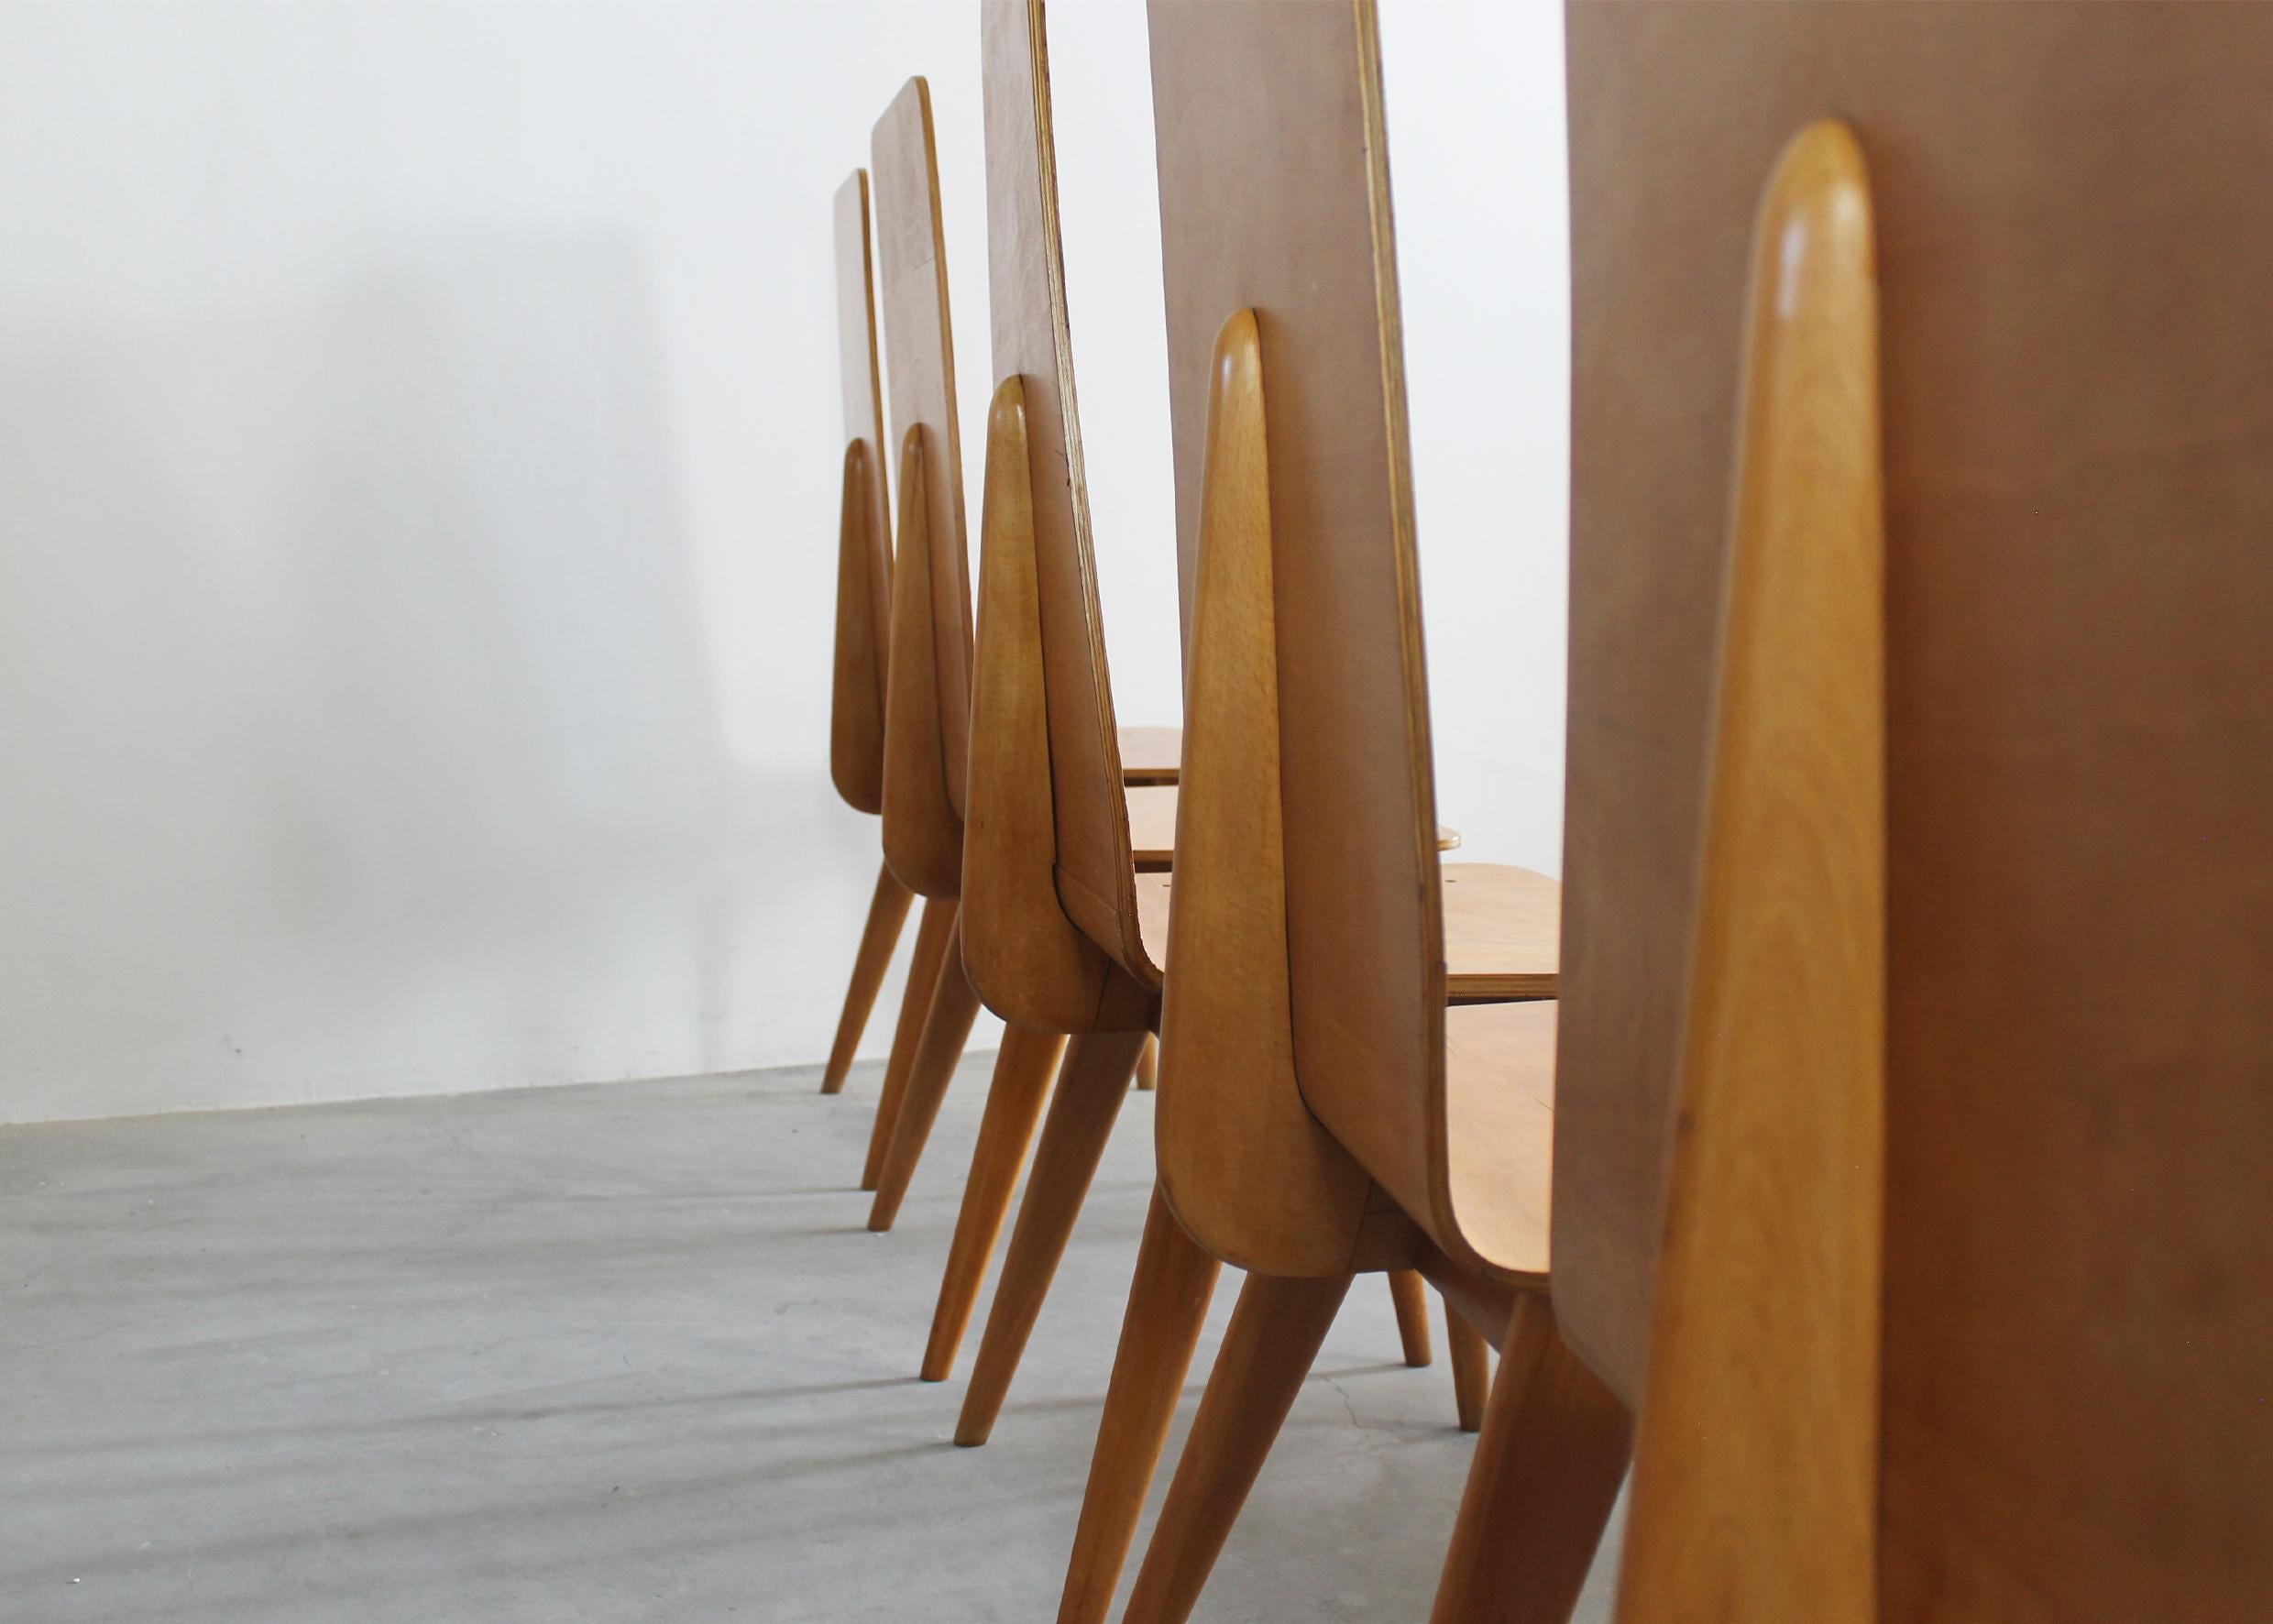 Set of Six Dining Chairs in Wood by Sineo Gemignani Italian Manufacture 1940s For Sale 3